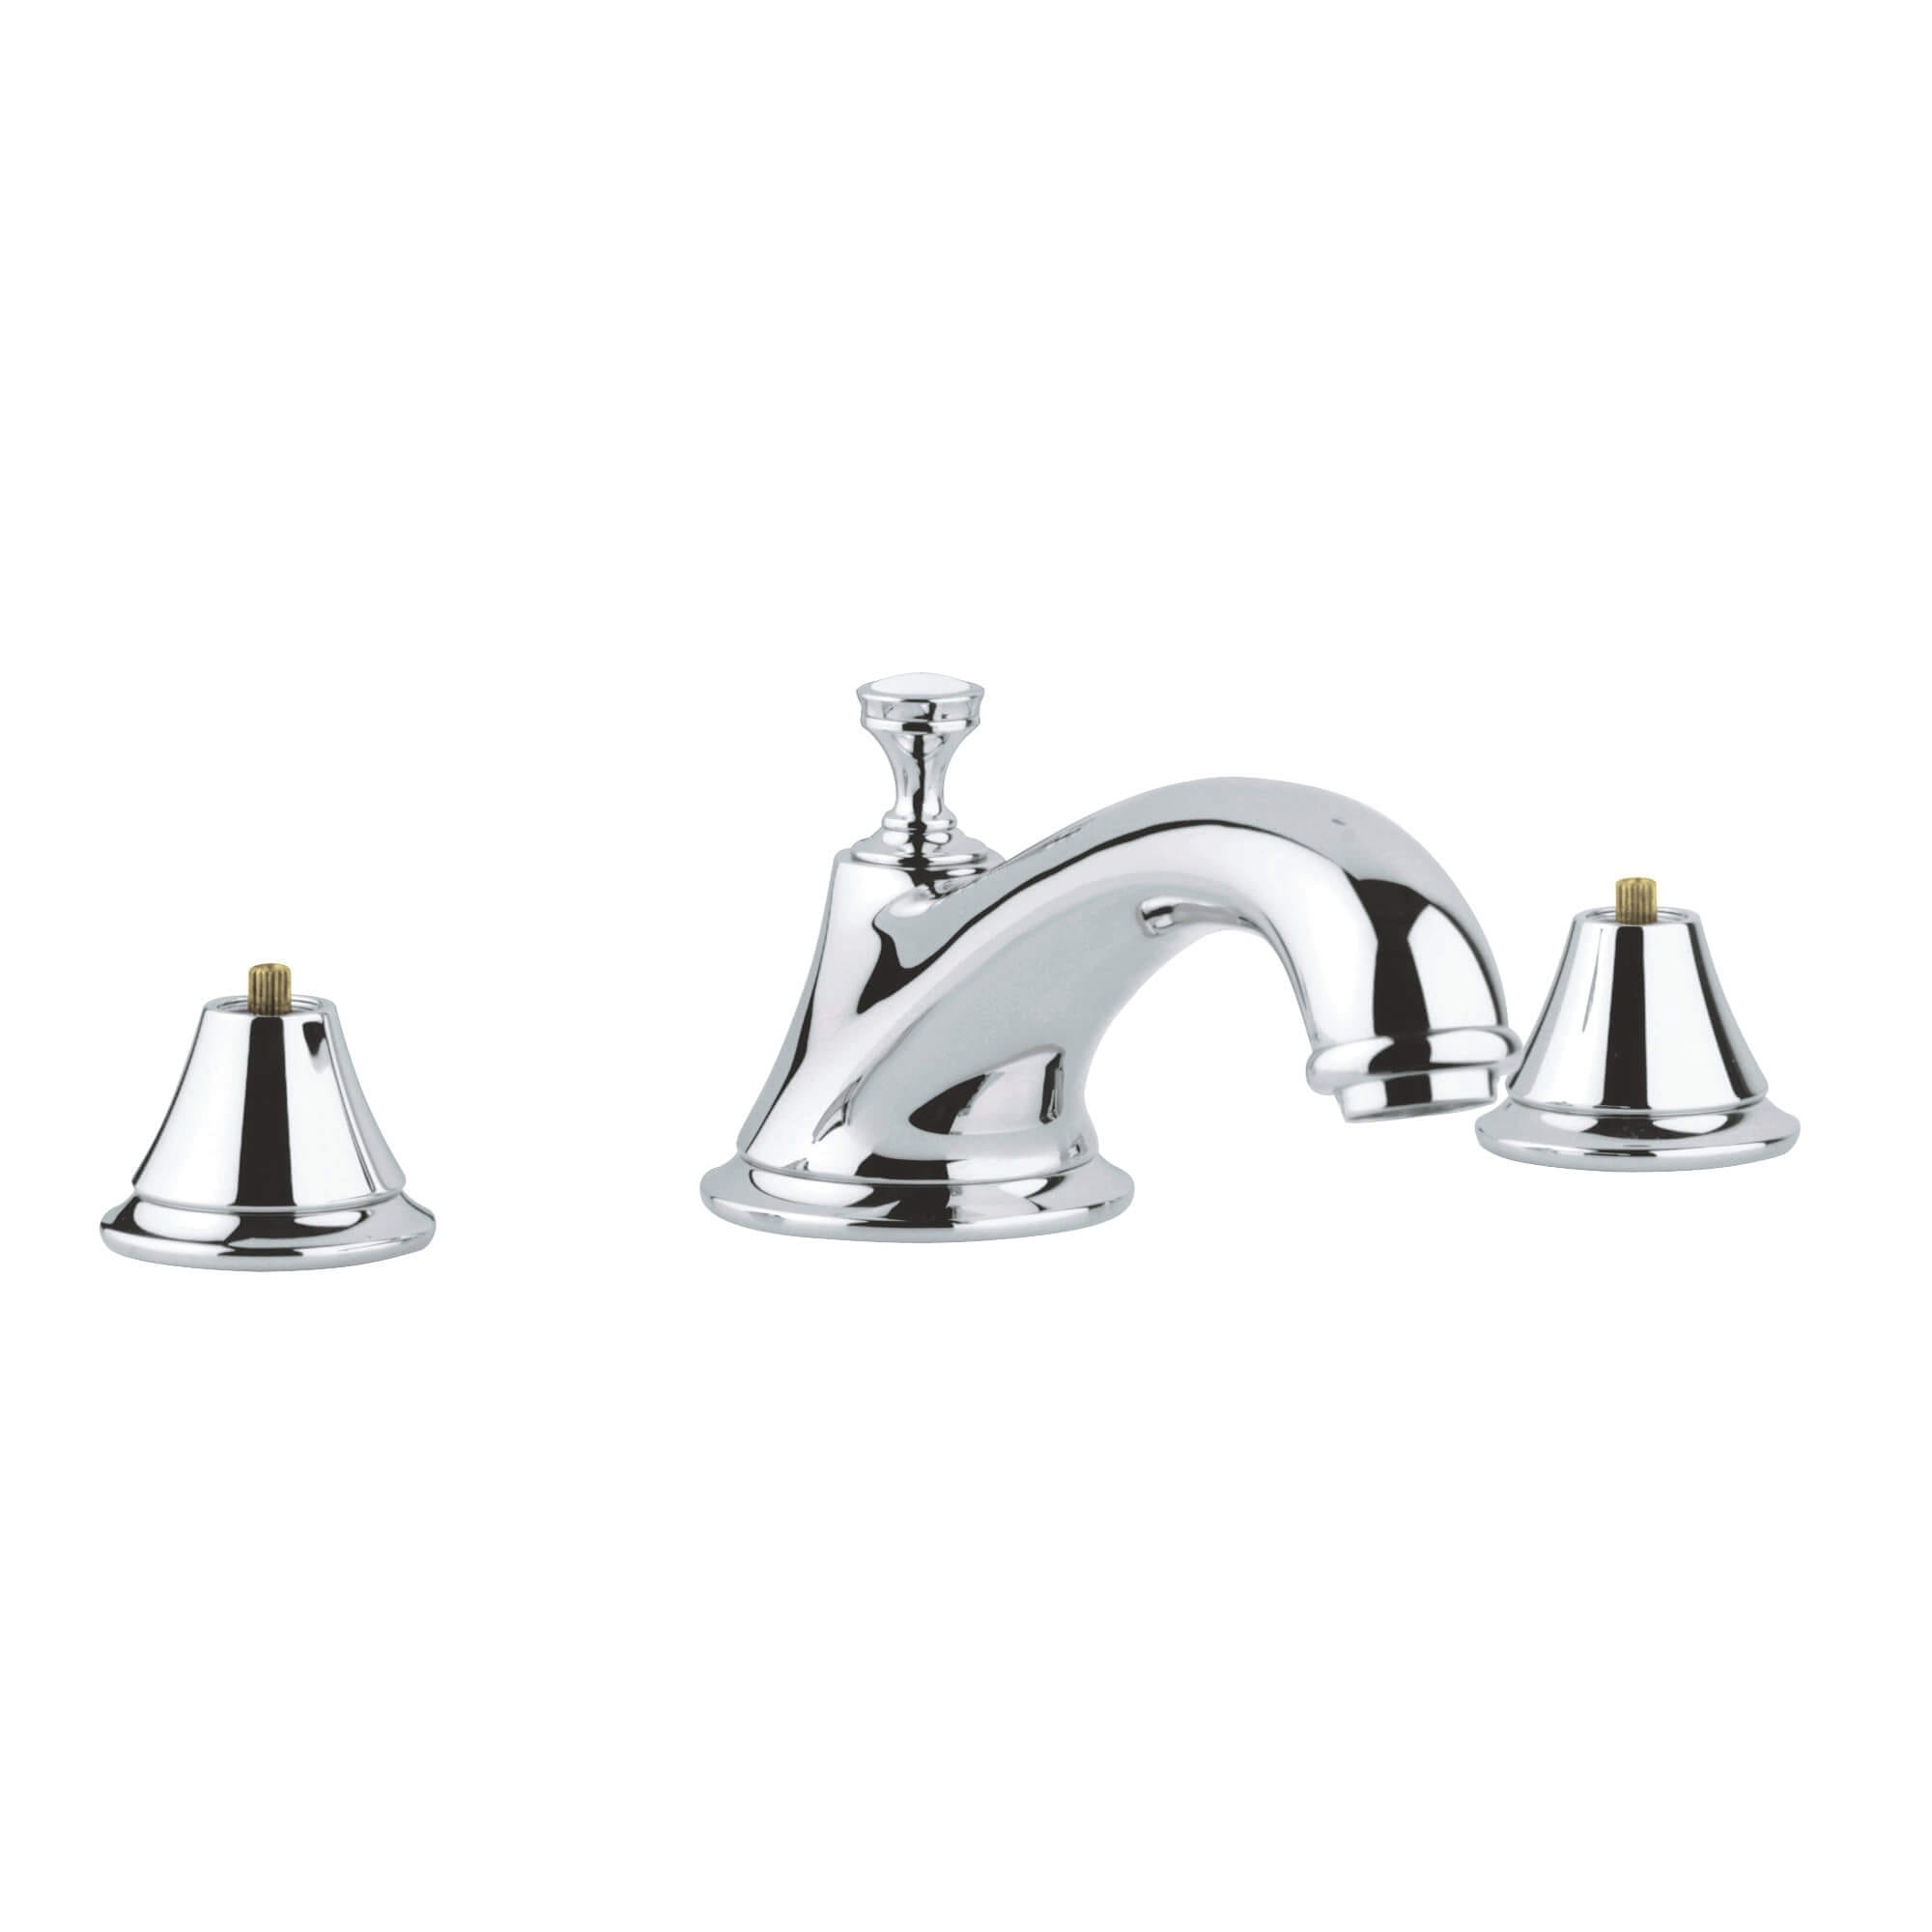 Grohe 25055000 Roman Tub Faucet, Without Handles